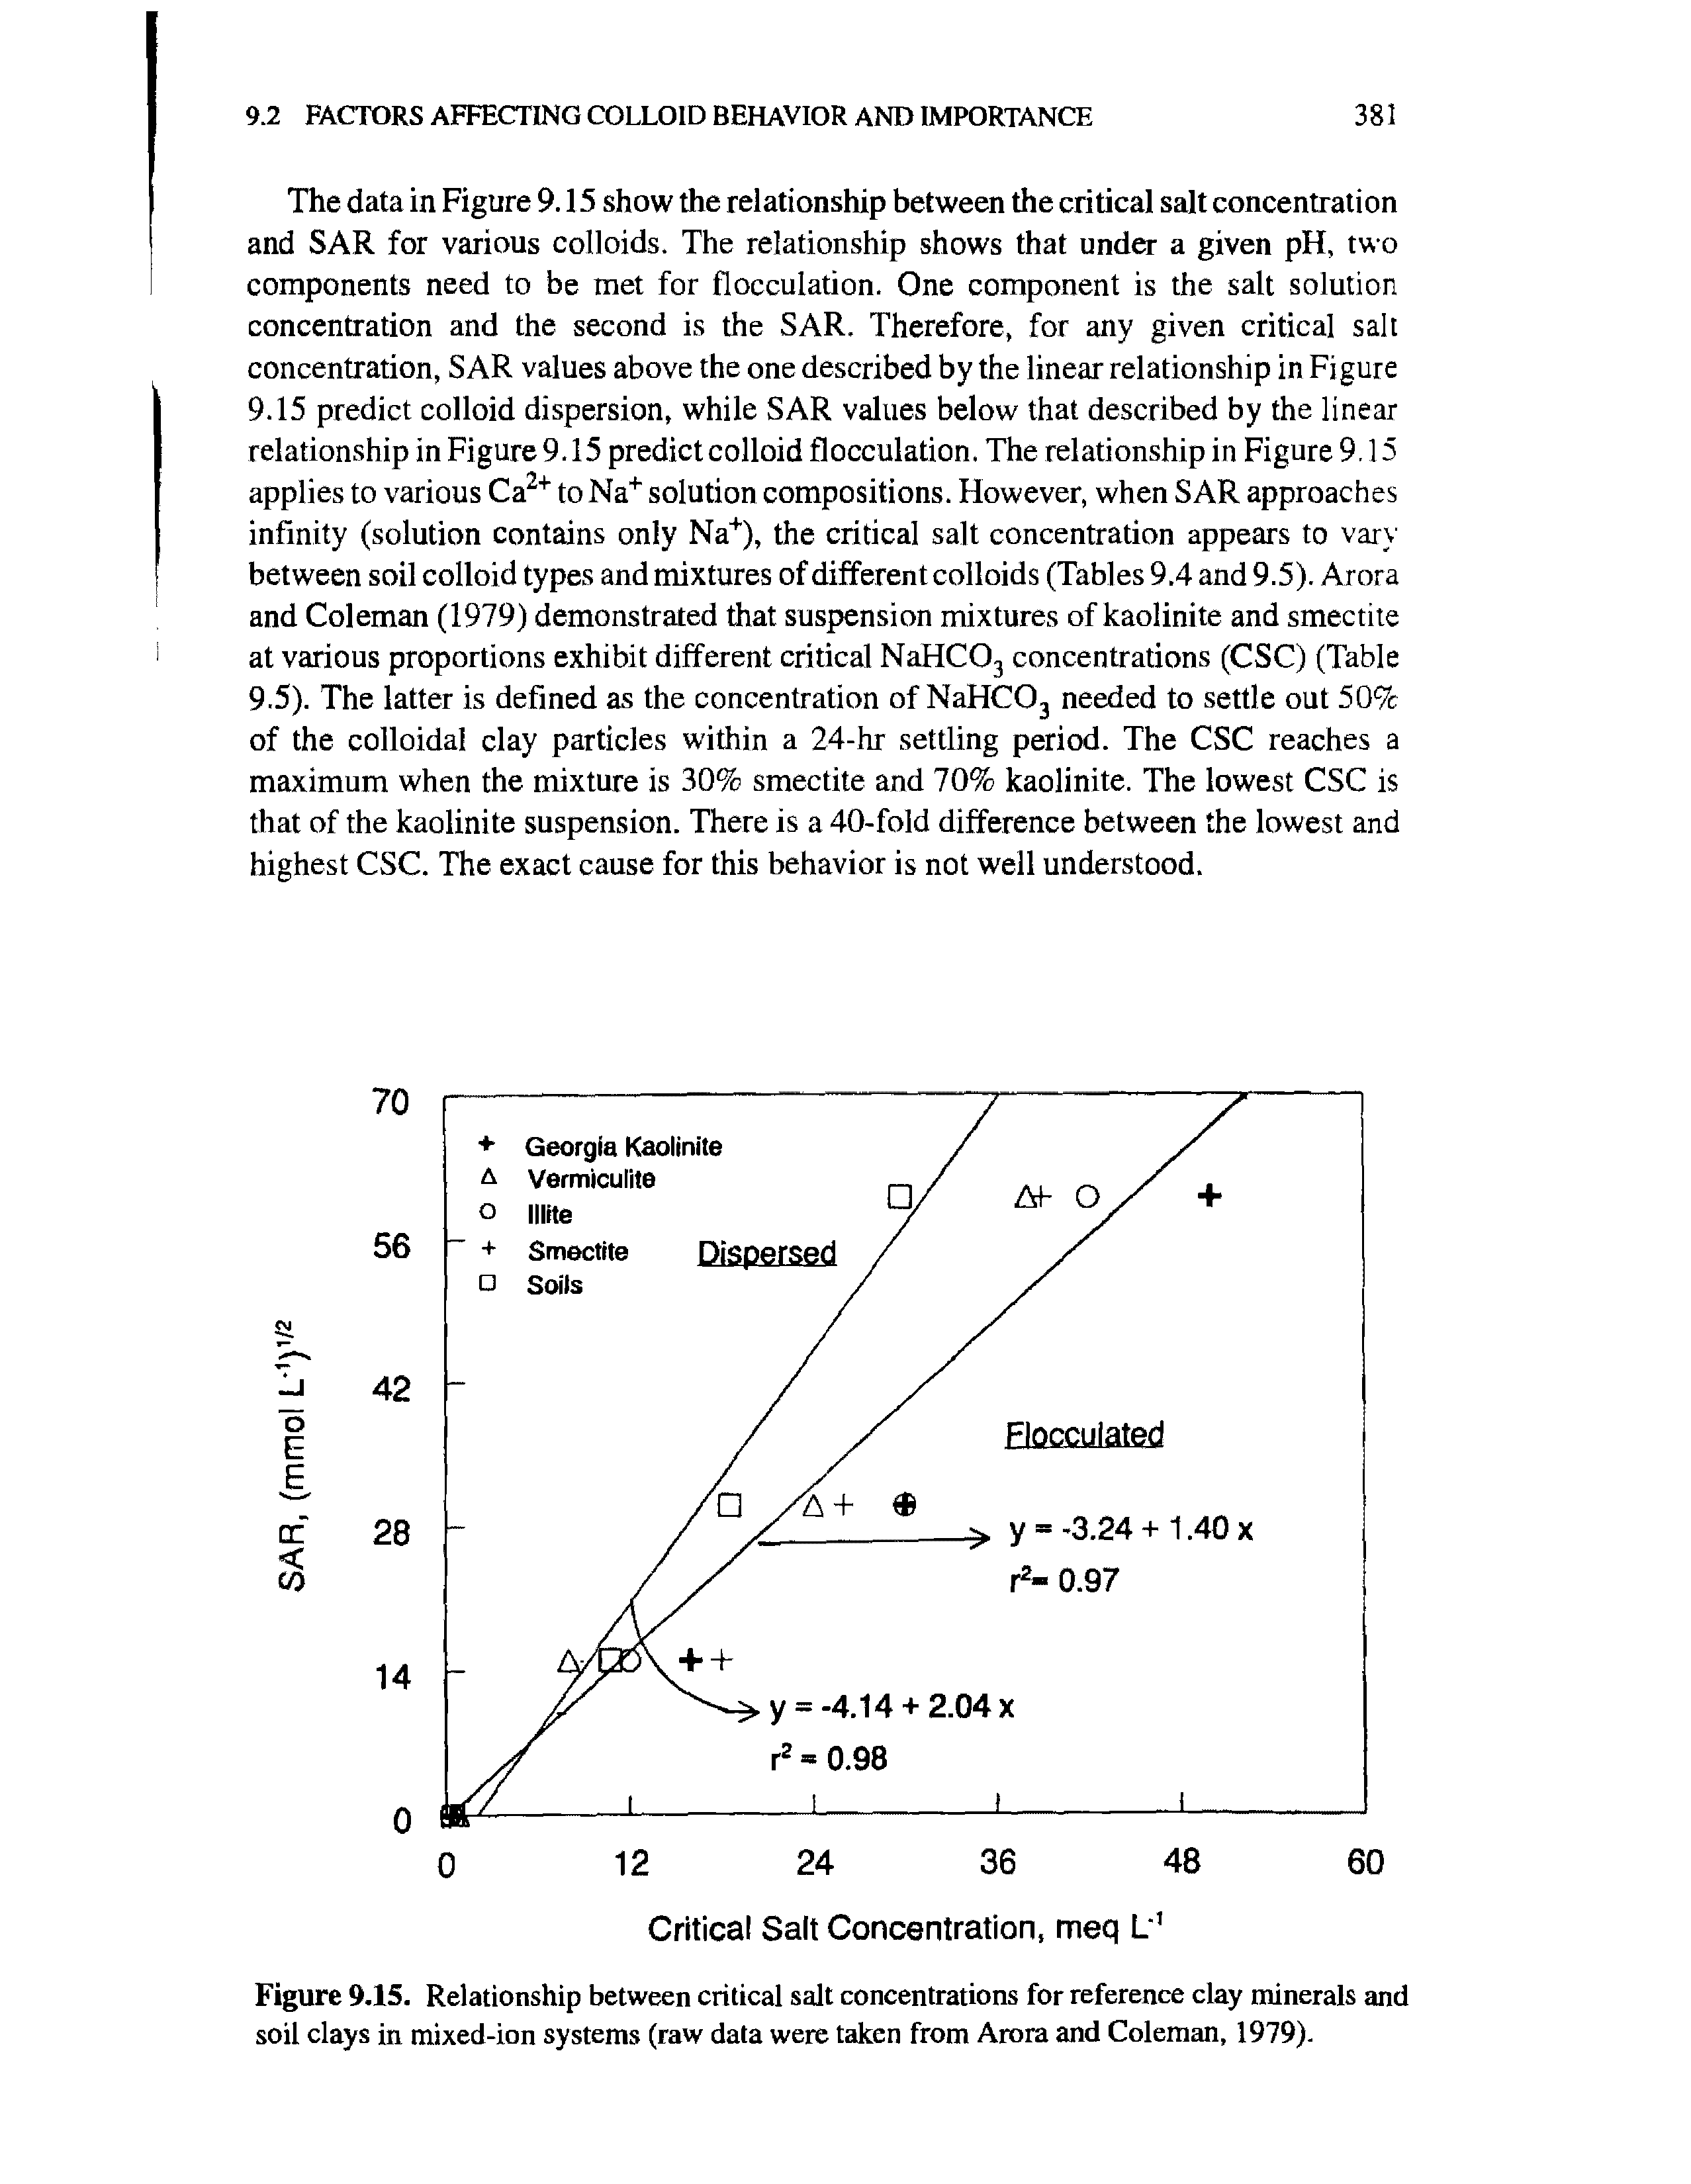 Figure 9.15. Relationship between critical salt concentrations for reference clay minerals and soil clays in mixed-ion systems (raw data were taken from Arora and Coleman, 1979).